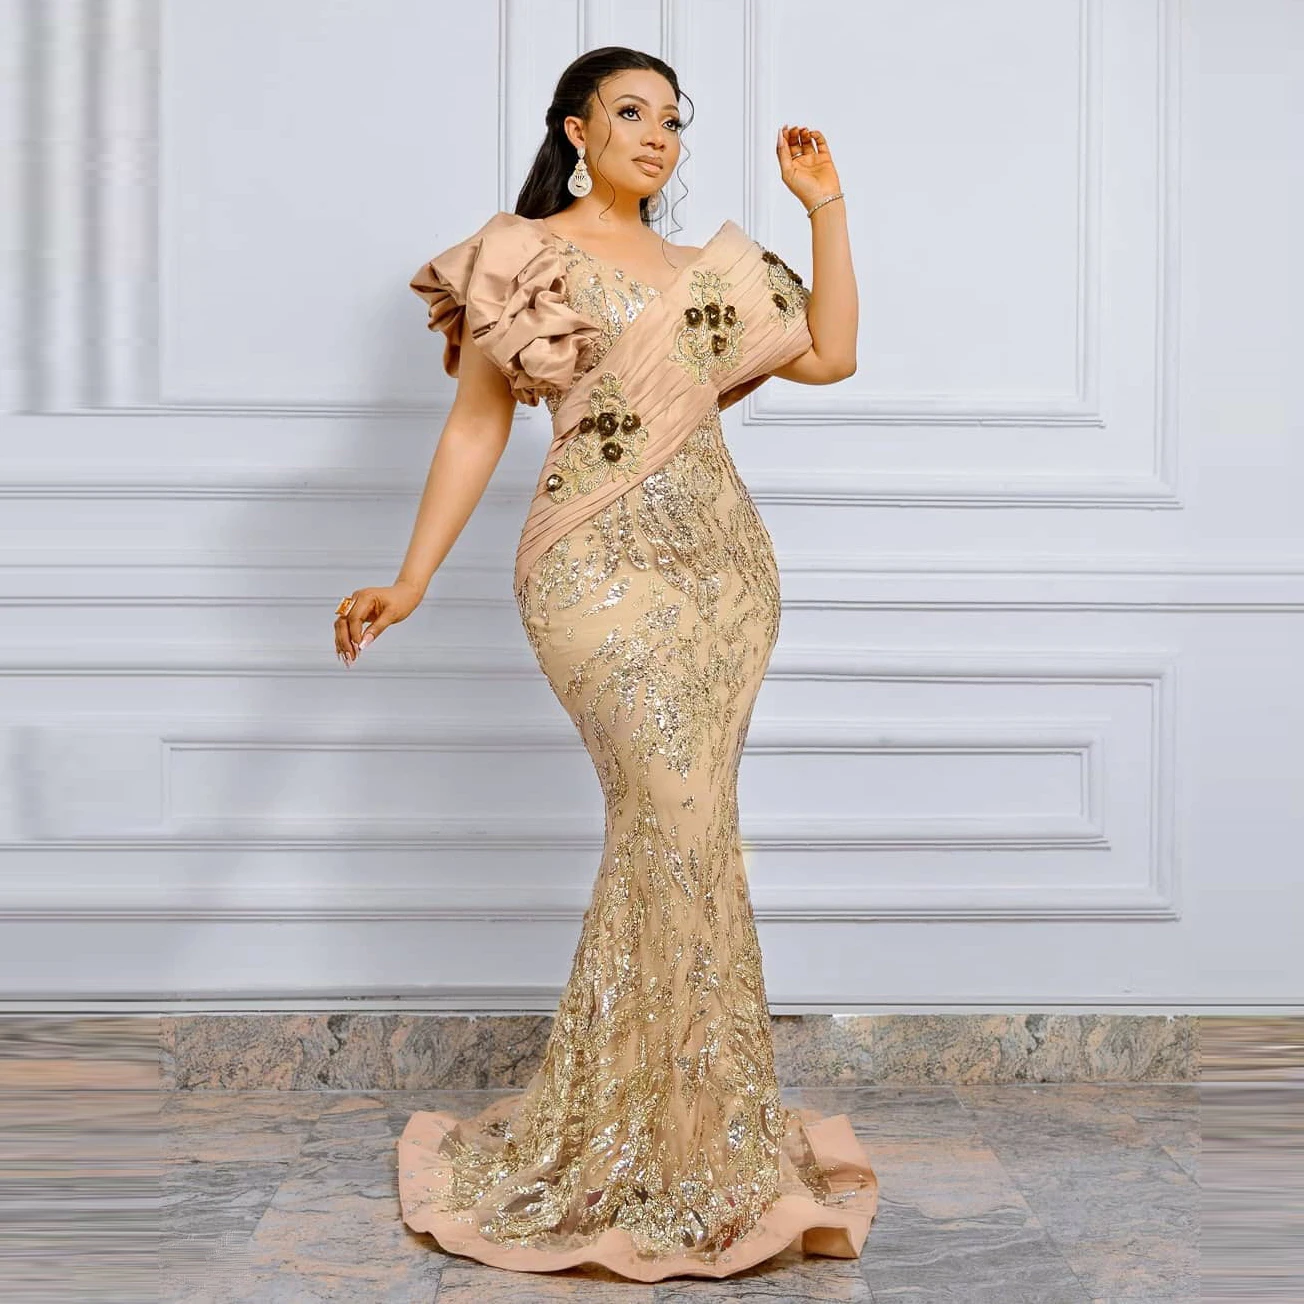 

Glitter Gold Mermaid Prom Dresses Aso Ebi Style Shiny Sequined Lace Evening Dress Ruffles African Gown Robes de soirée Plus Size